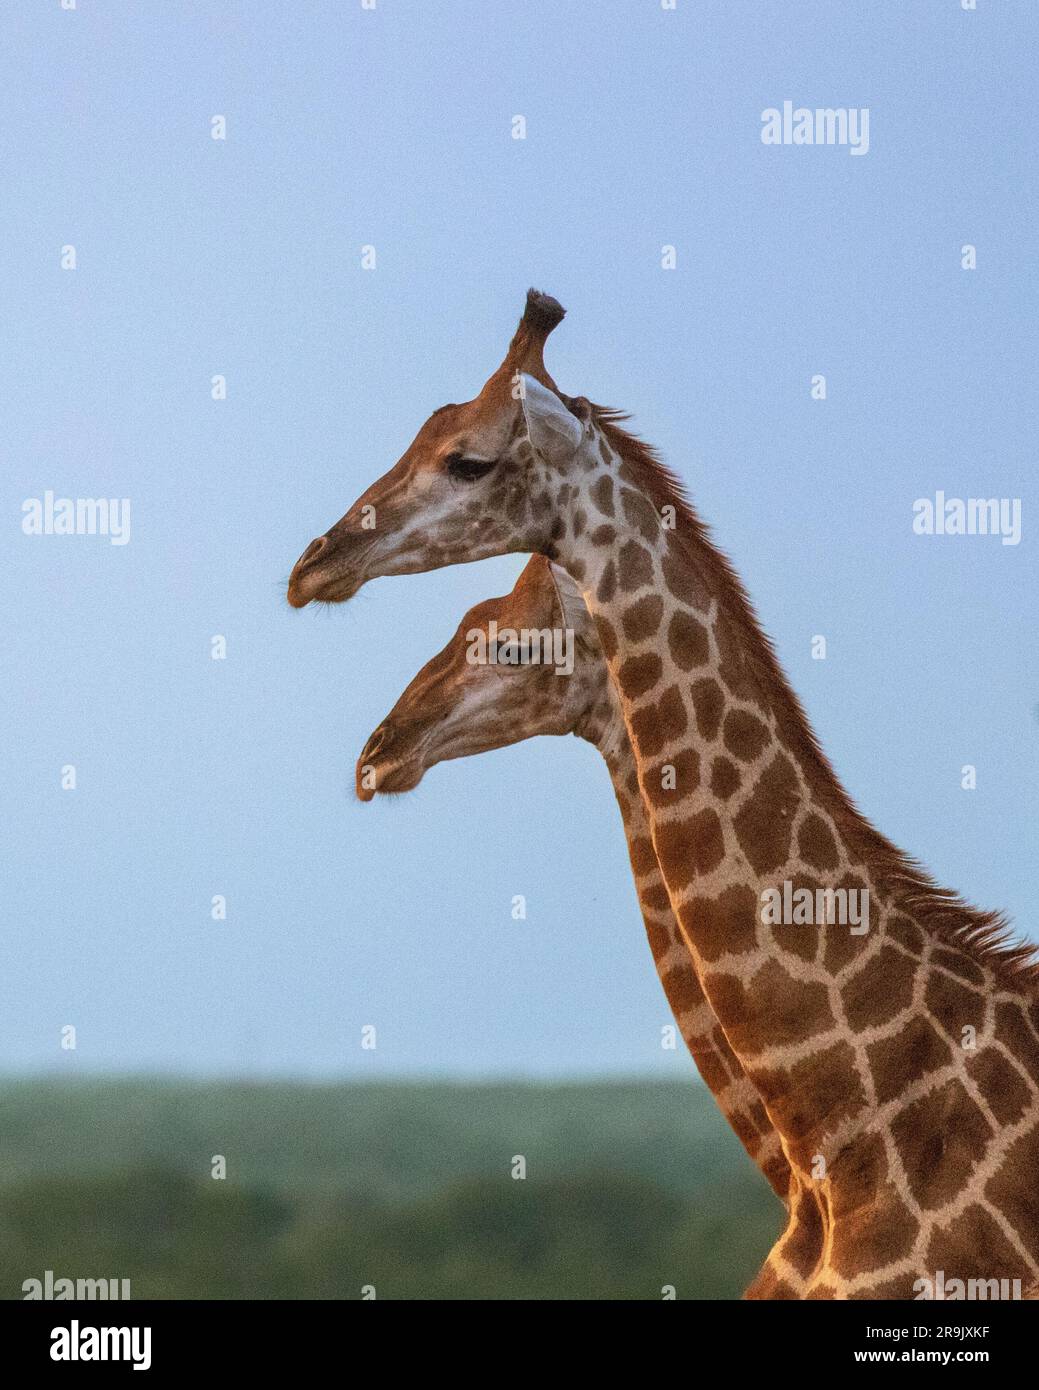 The side profile of two giraffe, Giraffa, standing next to each other. Stock Photo